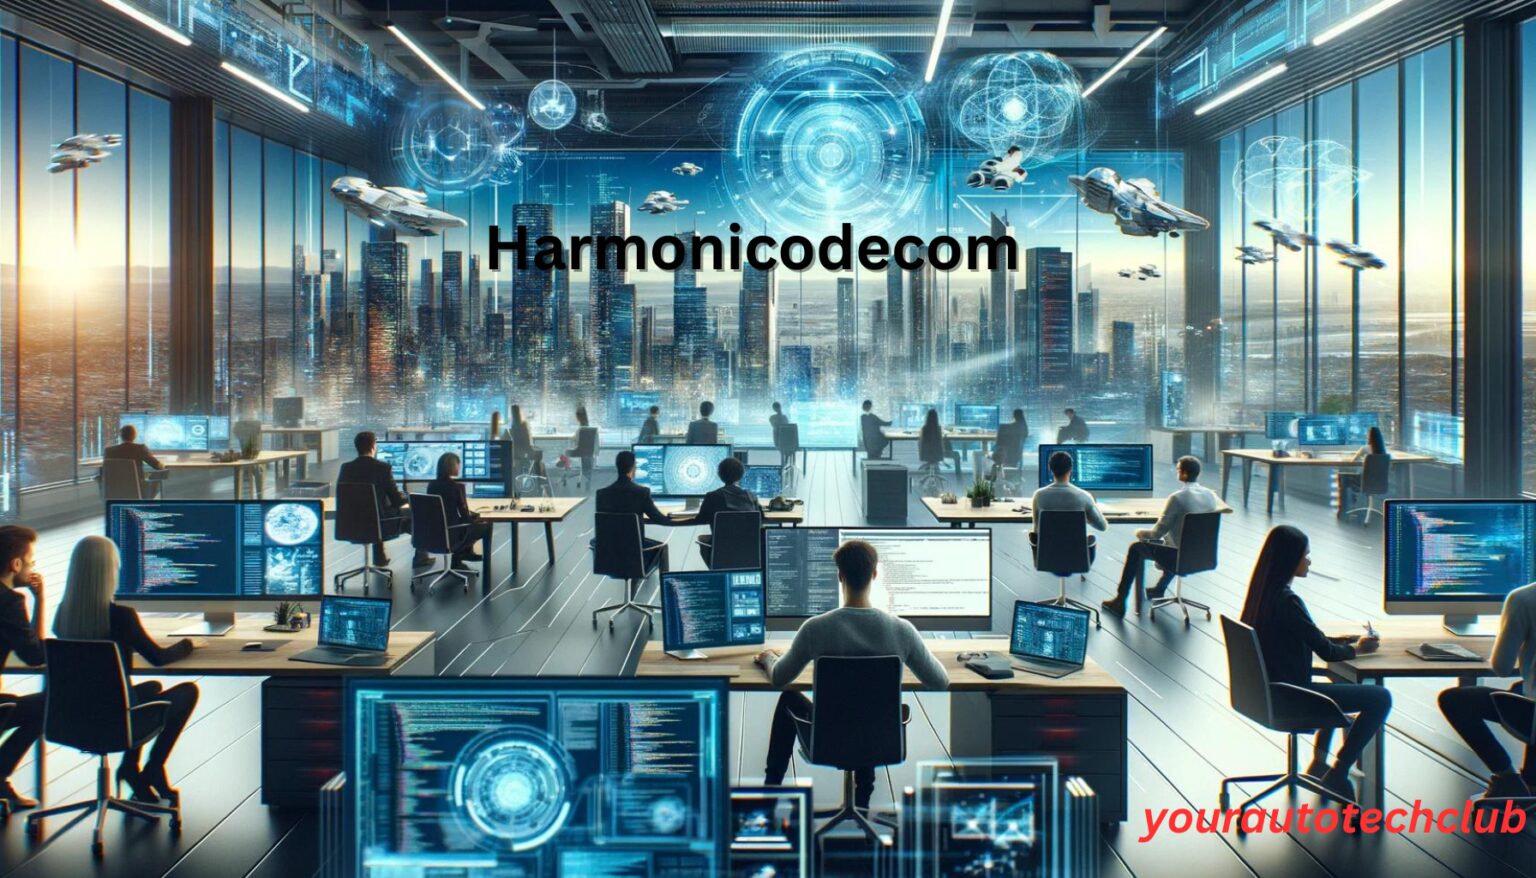 Harmonicodecom: Your Digital Haven for Coding Excellence